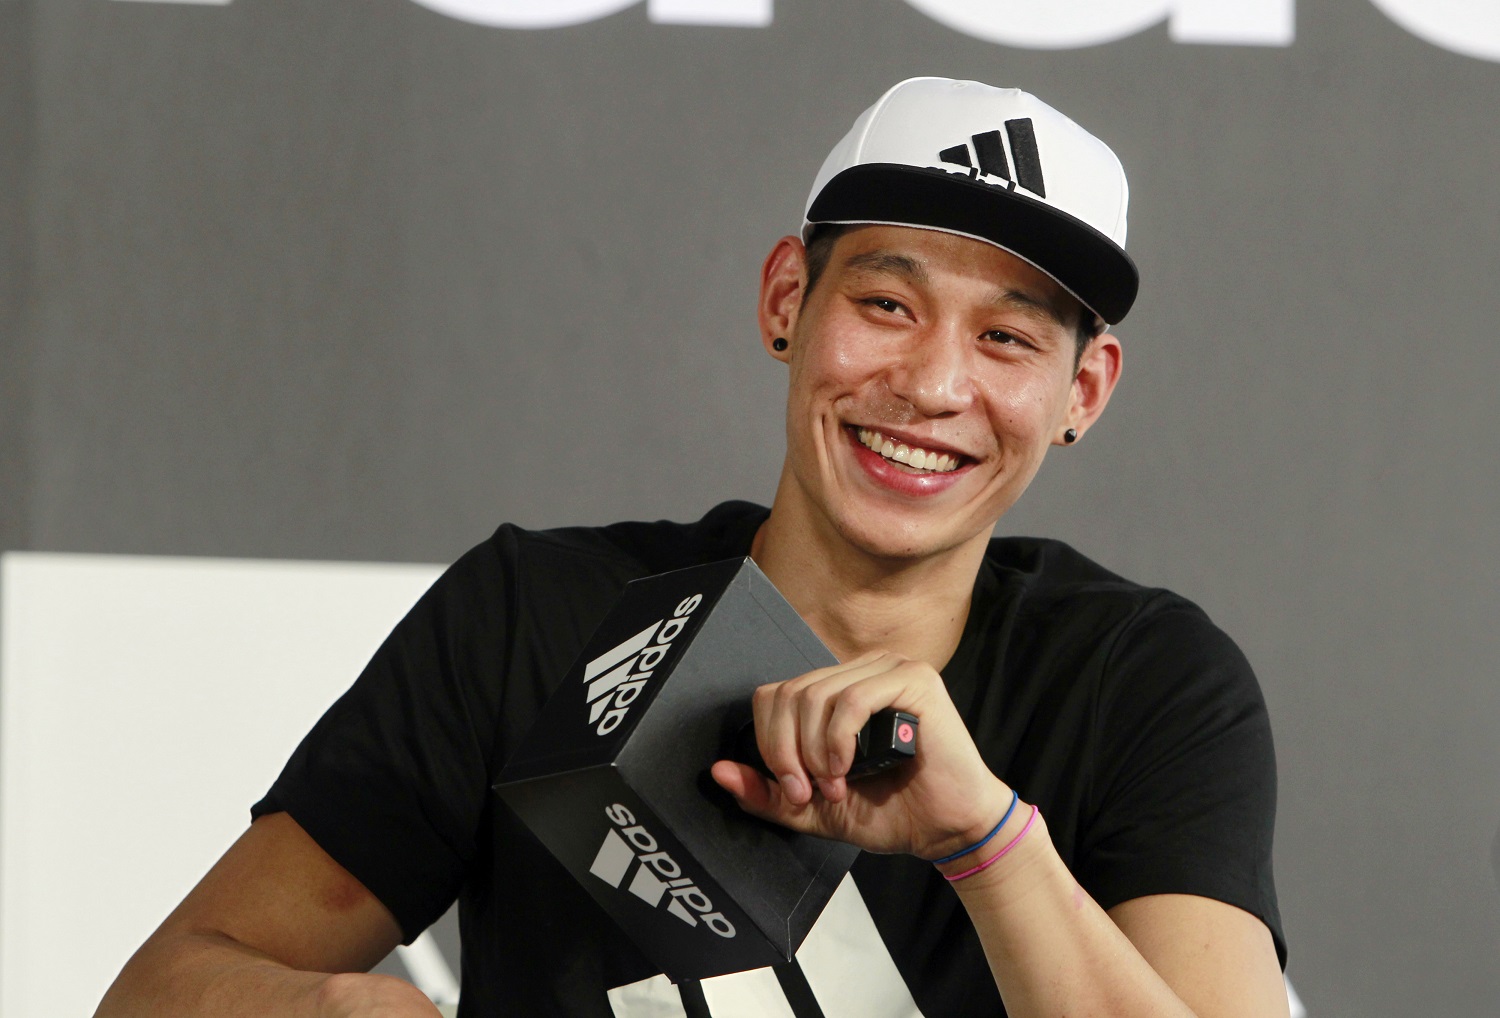 NBA Charlotte Hornets guard Jeremy Lin answers questions during a media event in Taipei, Taiwan, Friday, June 10, 2016. Lin is in Taiwan to host basketball clinics and media events from June 10-17. (AP Photo/Chiang Ying-ying)